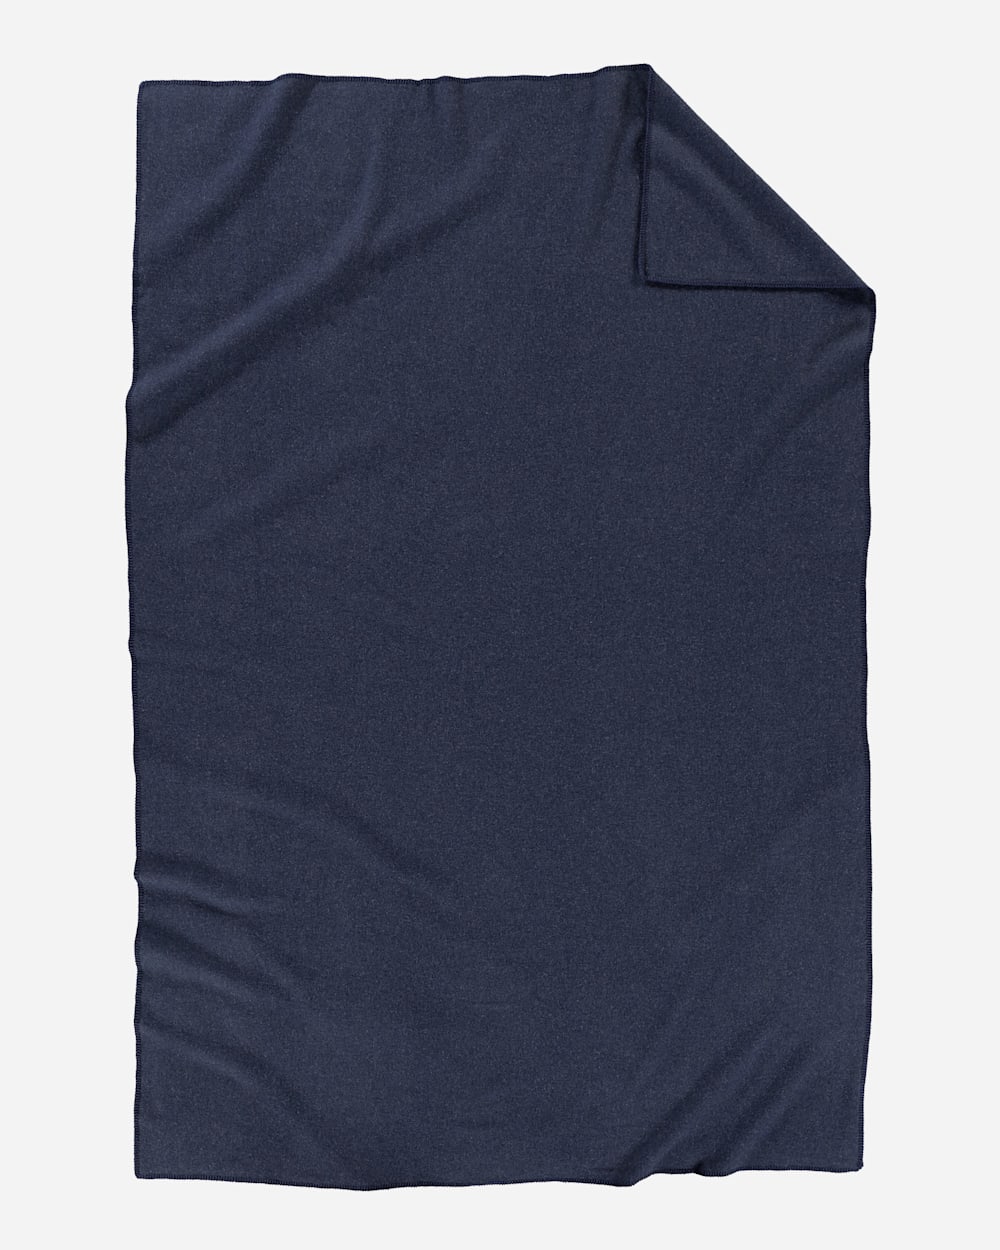 ALTERNATE VIEW OF ECO-WISE WOOL SOLID BLANKET IN NAVY HEATHER image number 2